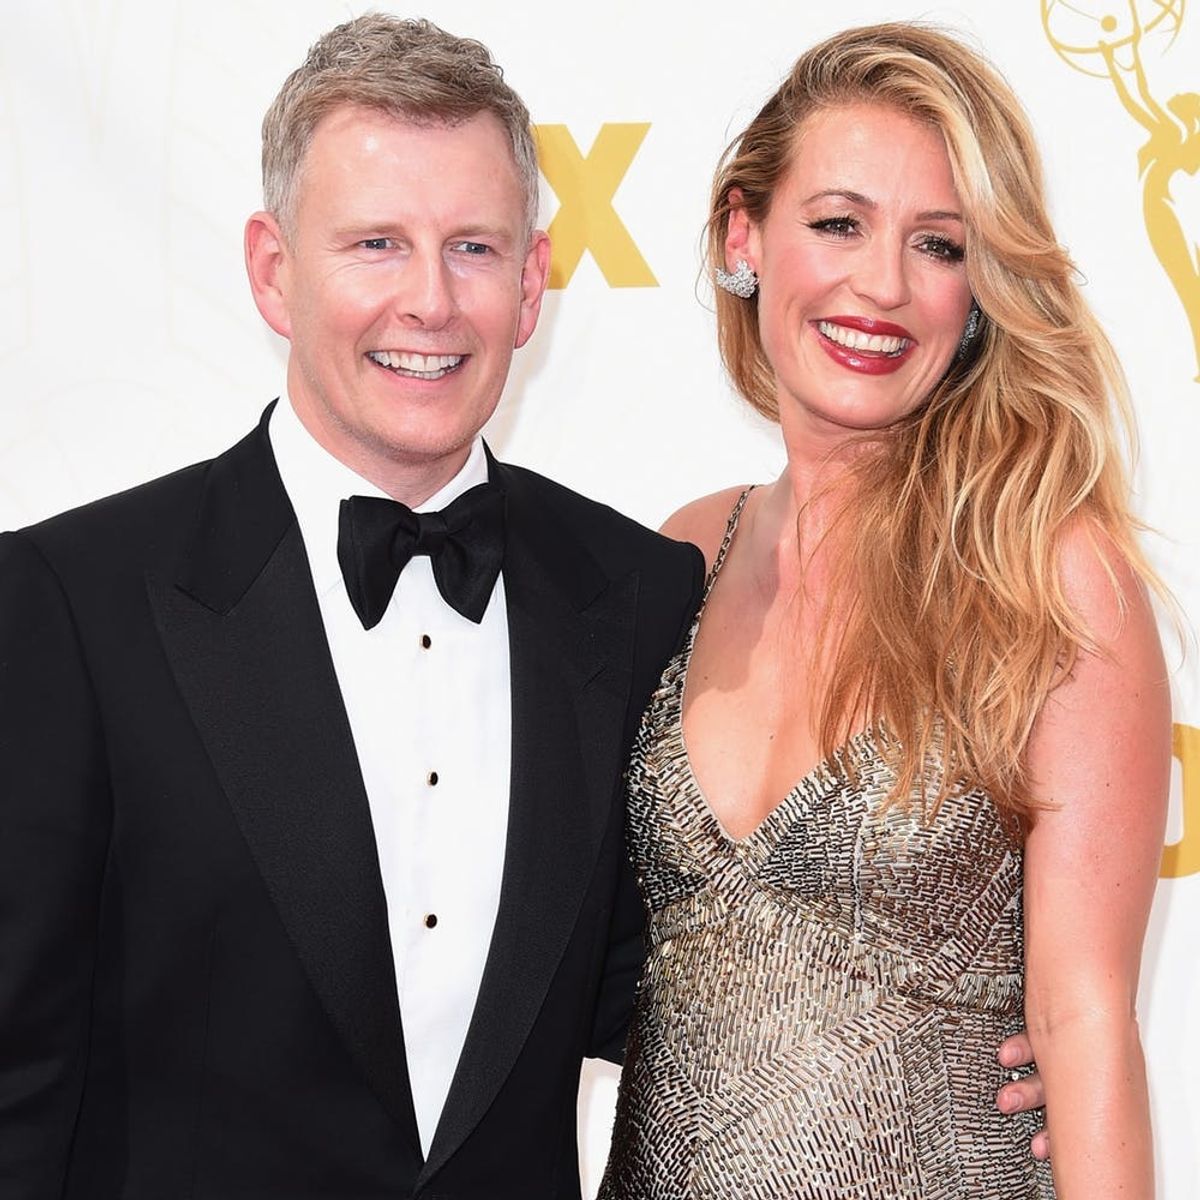 Cat Deeley and Patrick Kielty Are Expecting Their Second Child